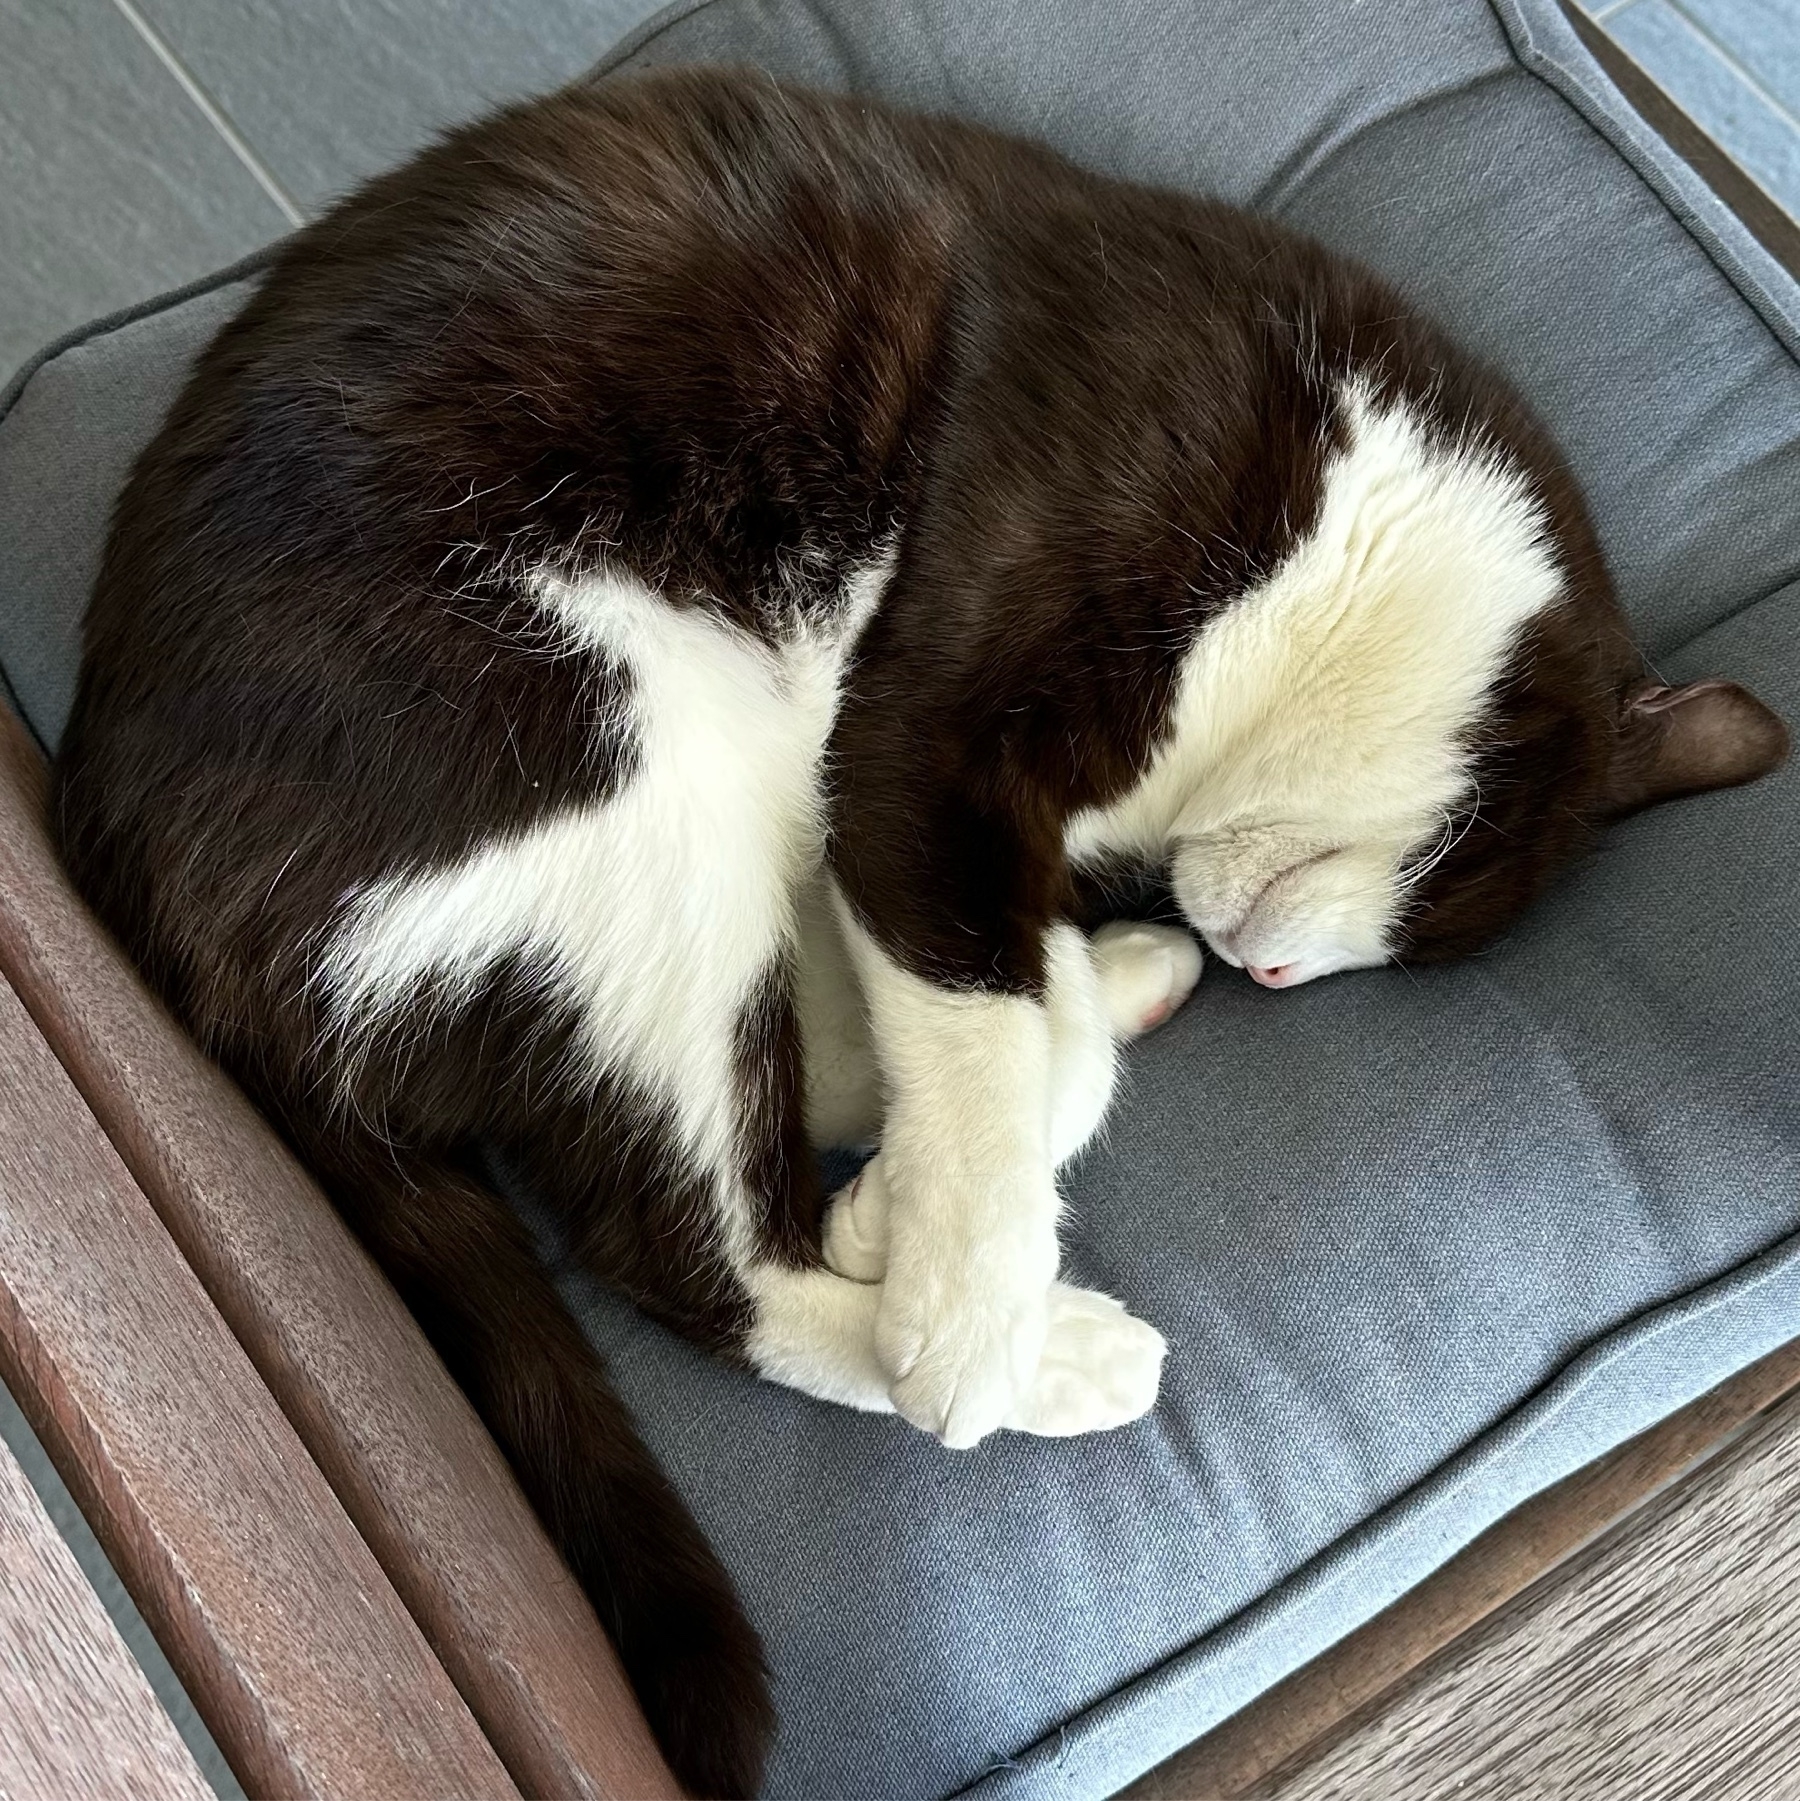 A black and white cat curled up on a faded blue cushion in an old wooden chair.